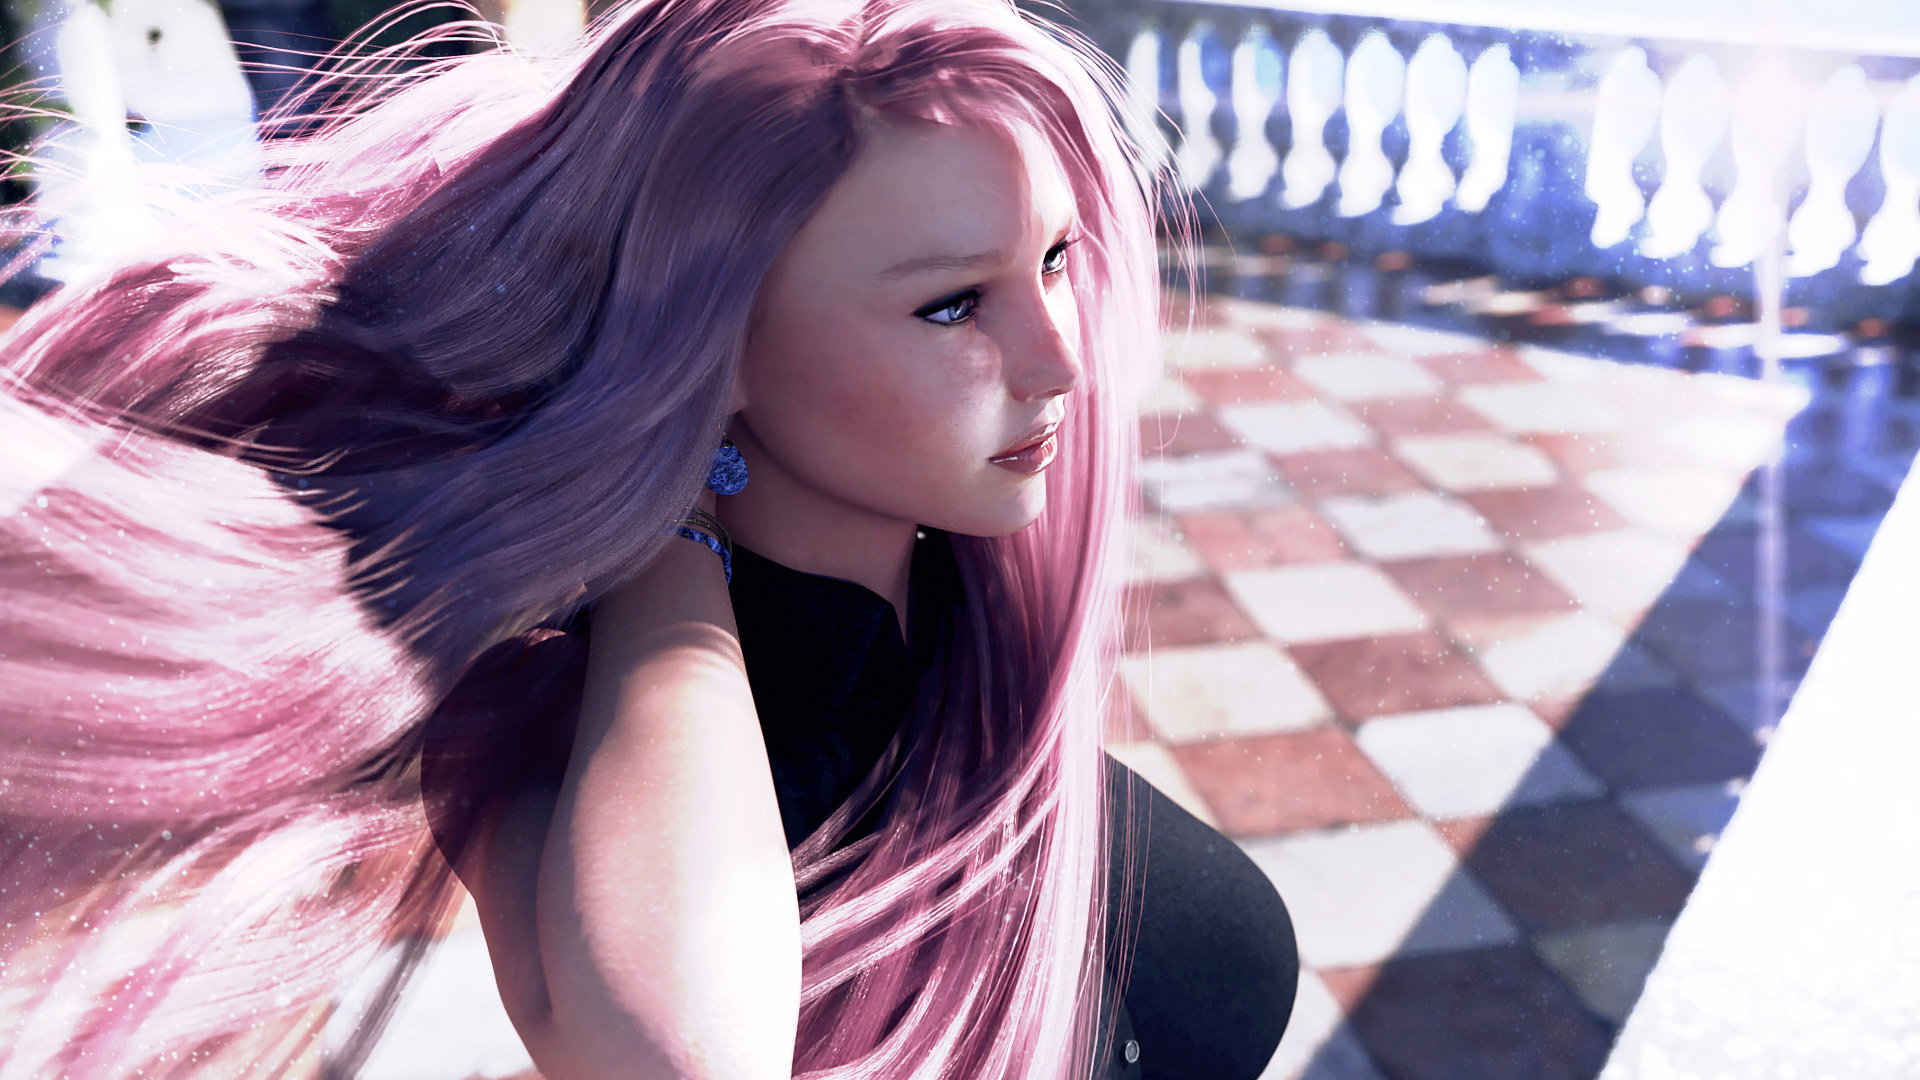 General 1920x1080 The Deluca Family CGI arms up lips jewelry black clothing digital art adult games pink hair looking away video game characters tiles balustrade sunlight backlighting long hair hand(s) in hair bracelets video game art lipstick closed mouth